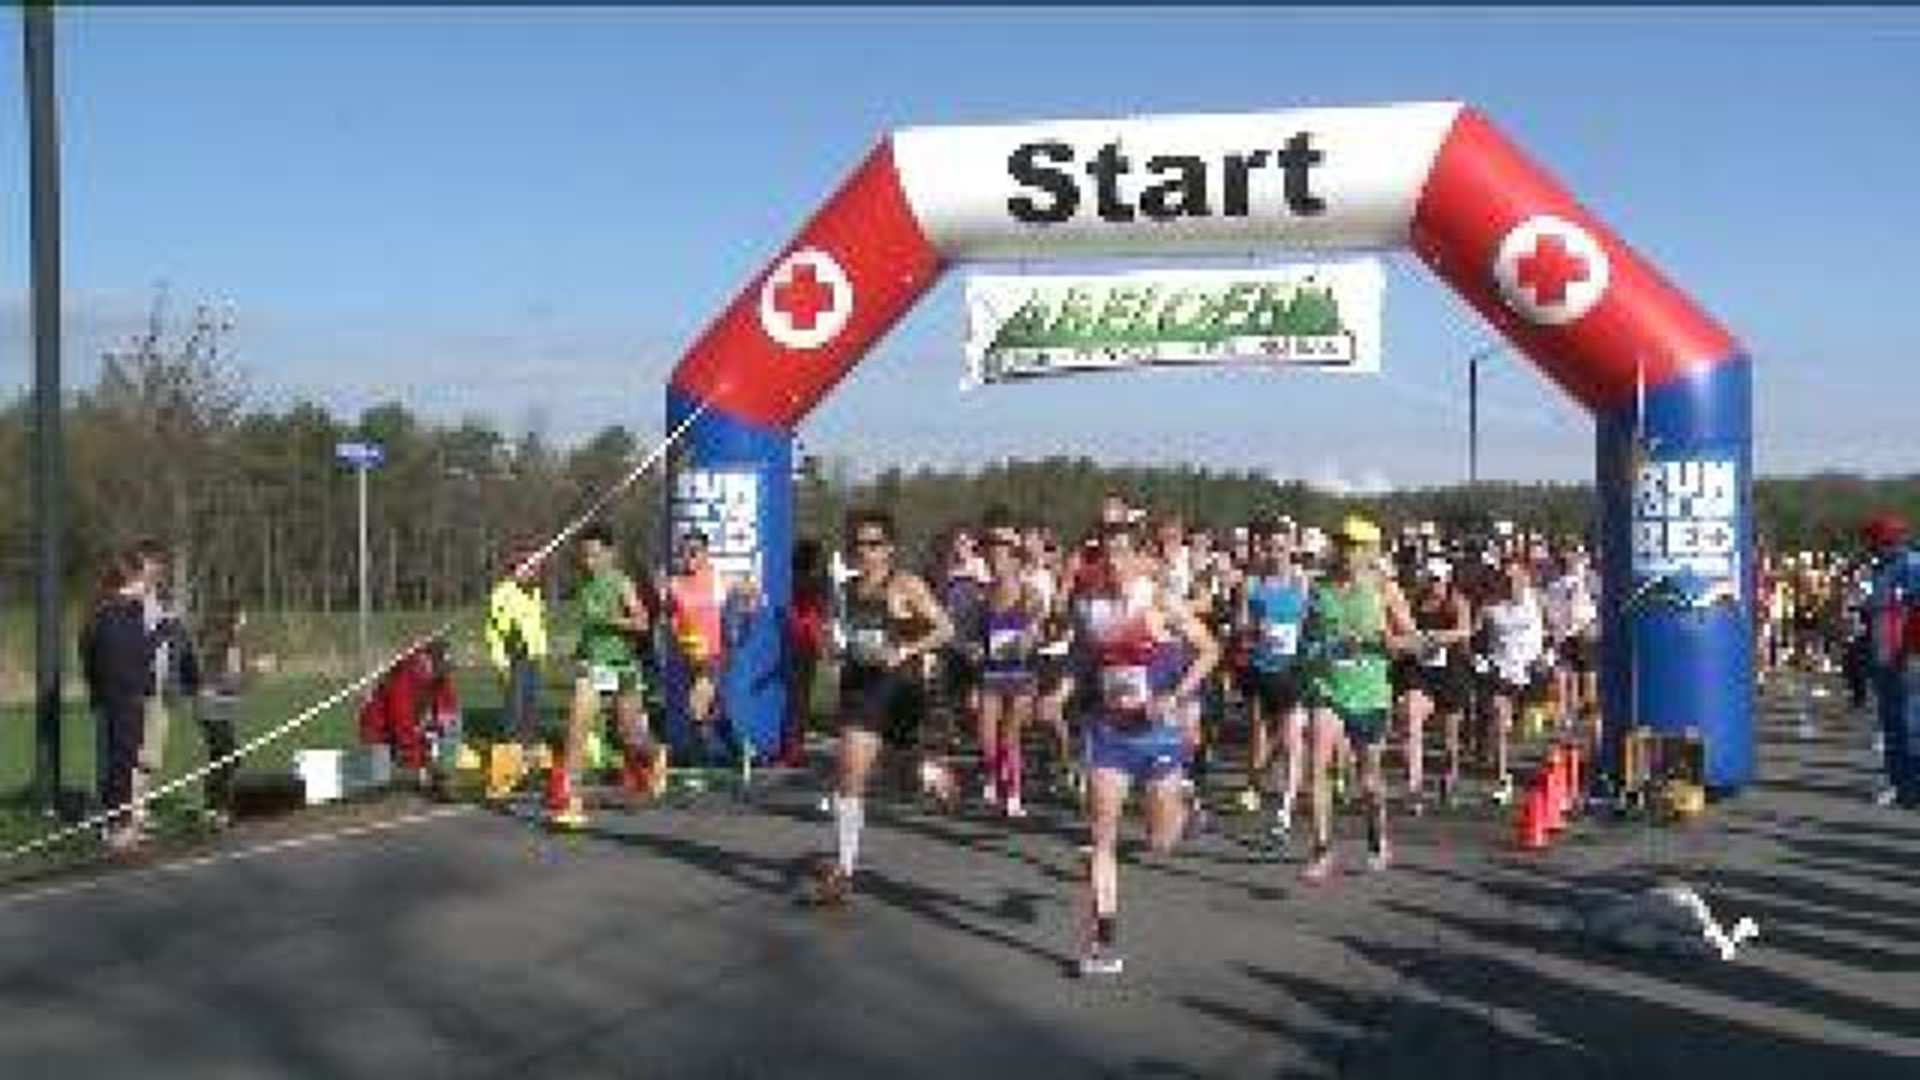 1,400 Take Part in Run for the Red Marathon